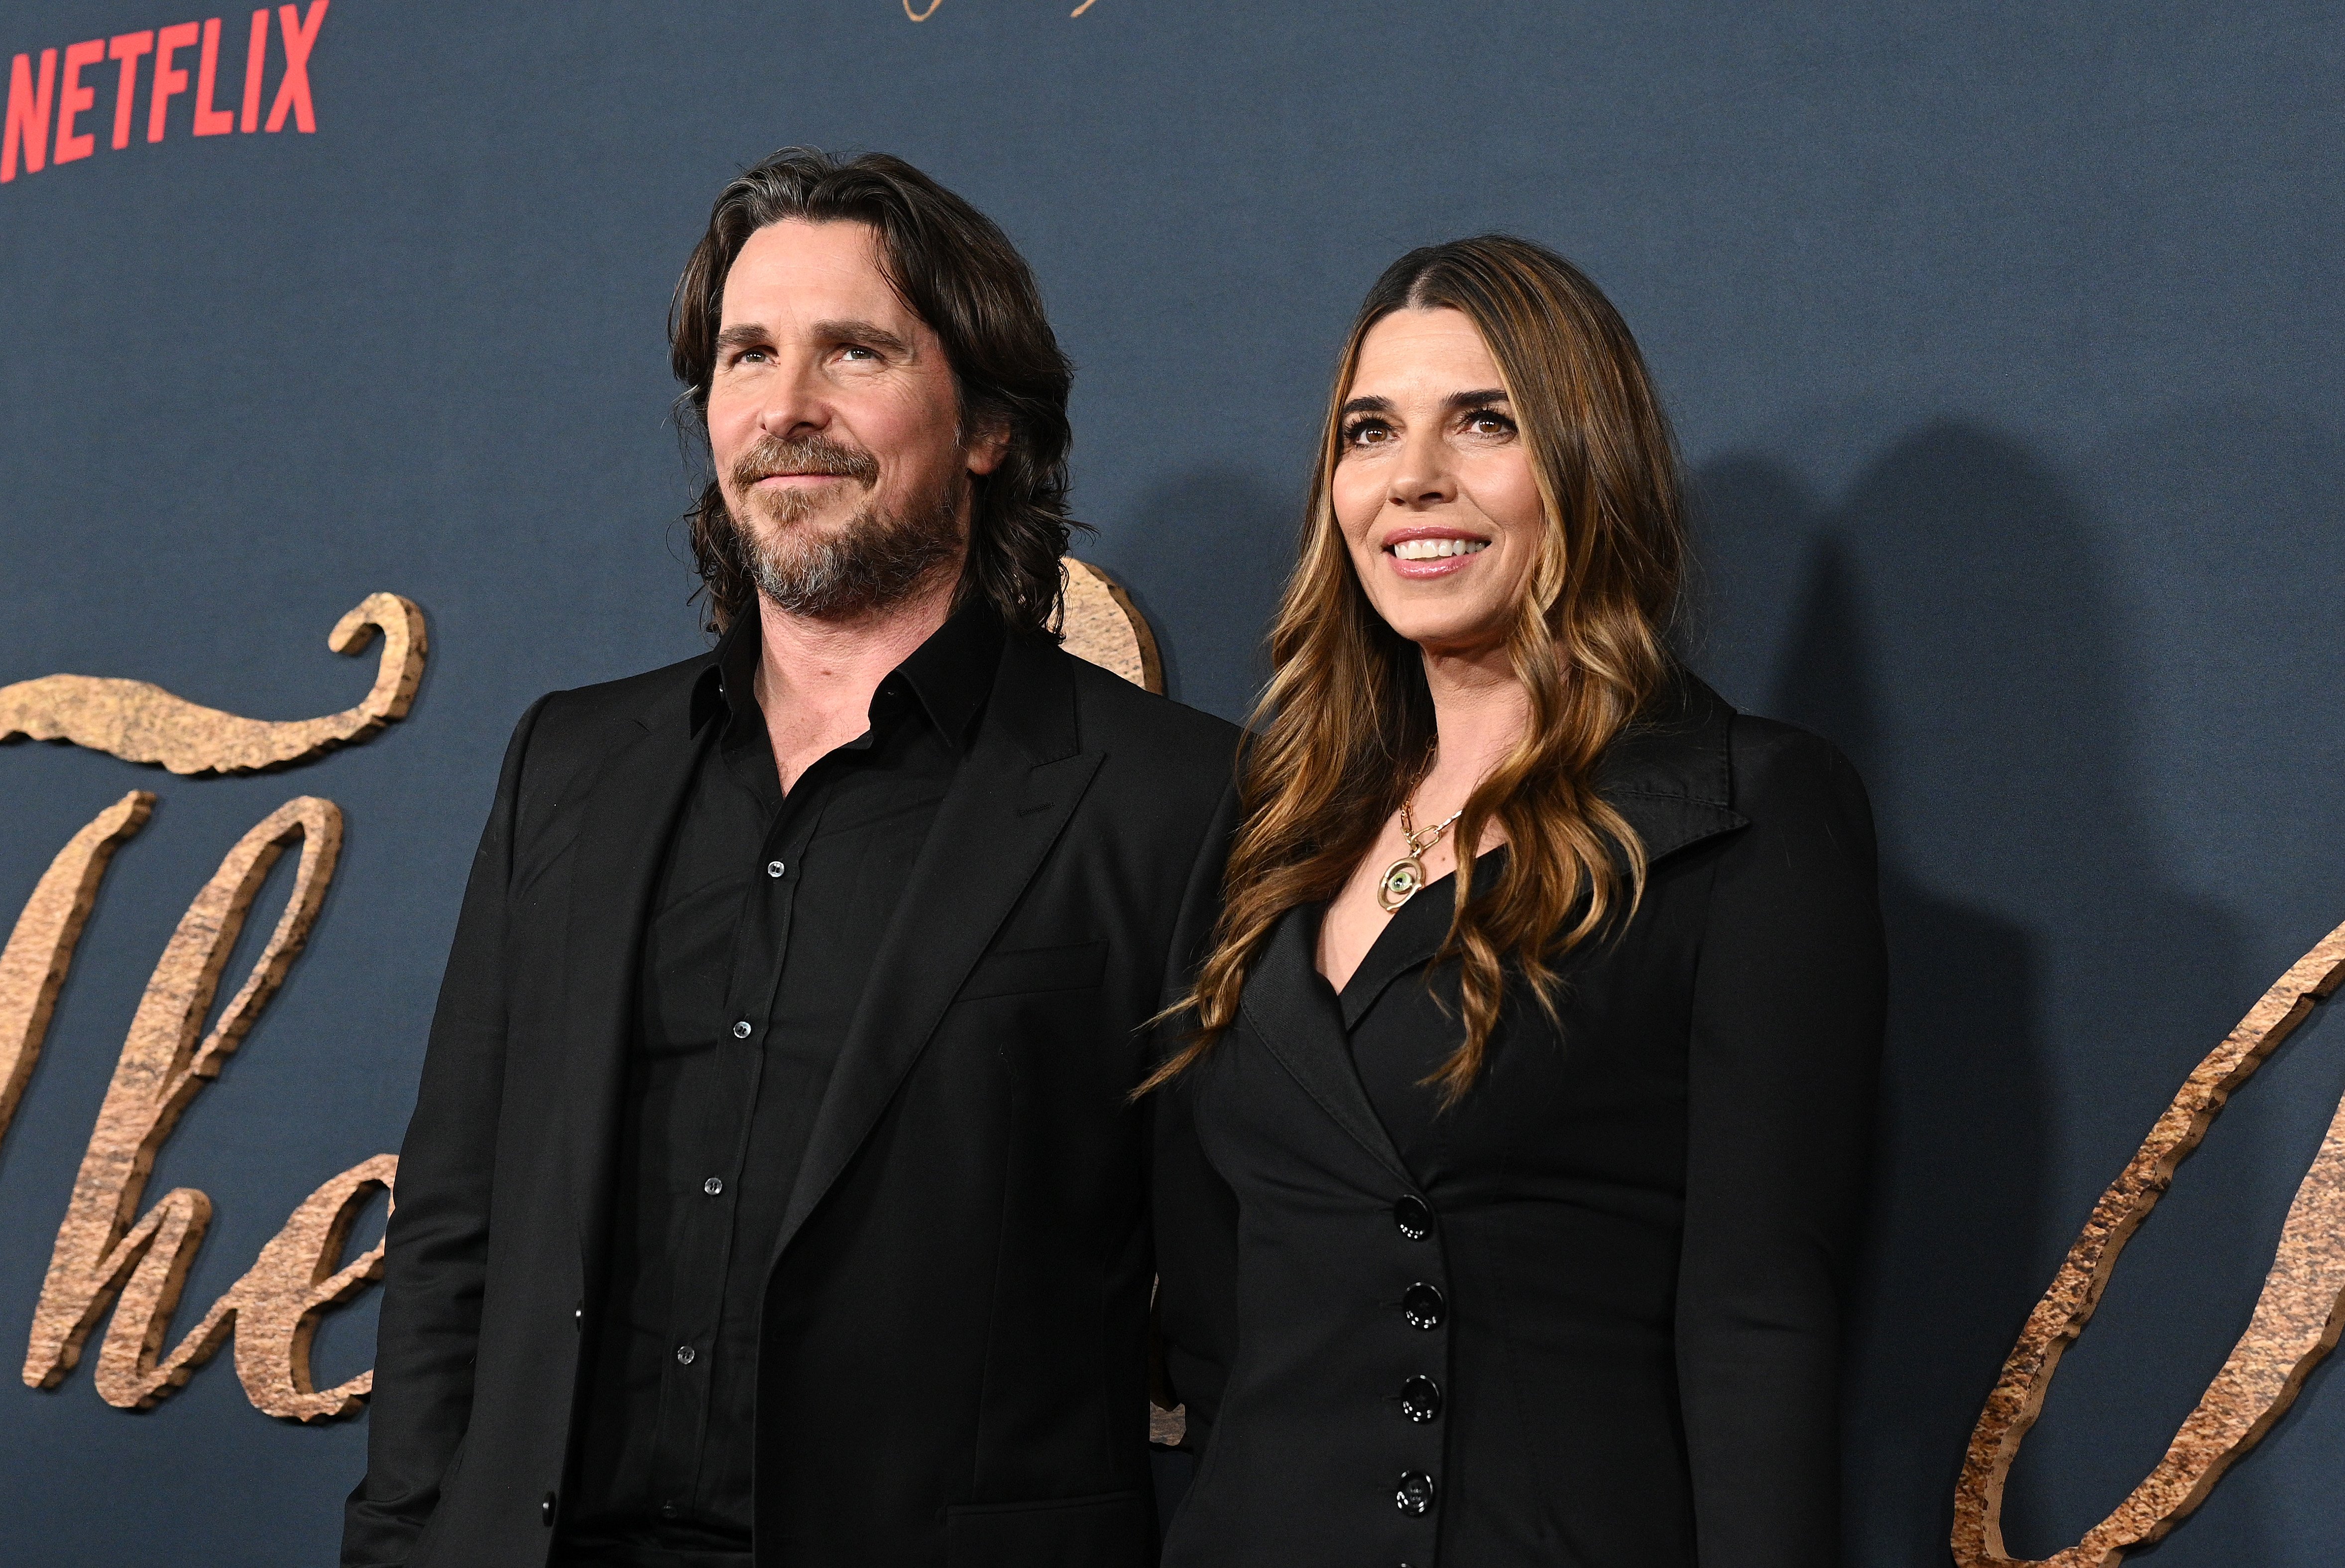 Christian Bale and Sibi Blažić at the DGA Theater on December 14, 2022 in Los Angeles, California